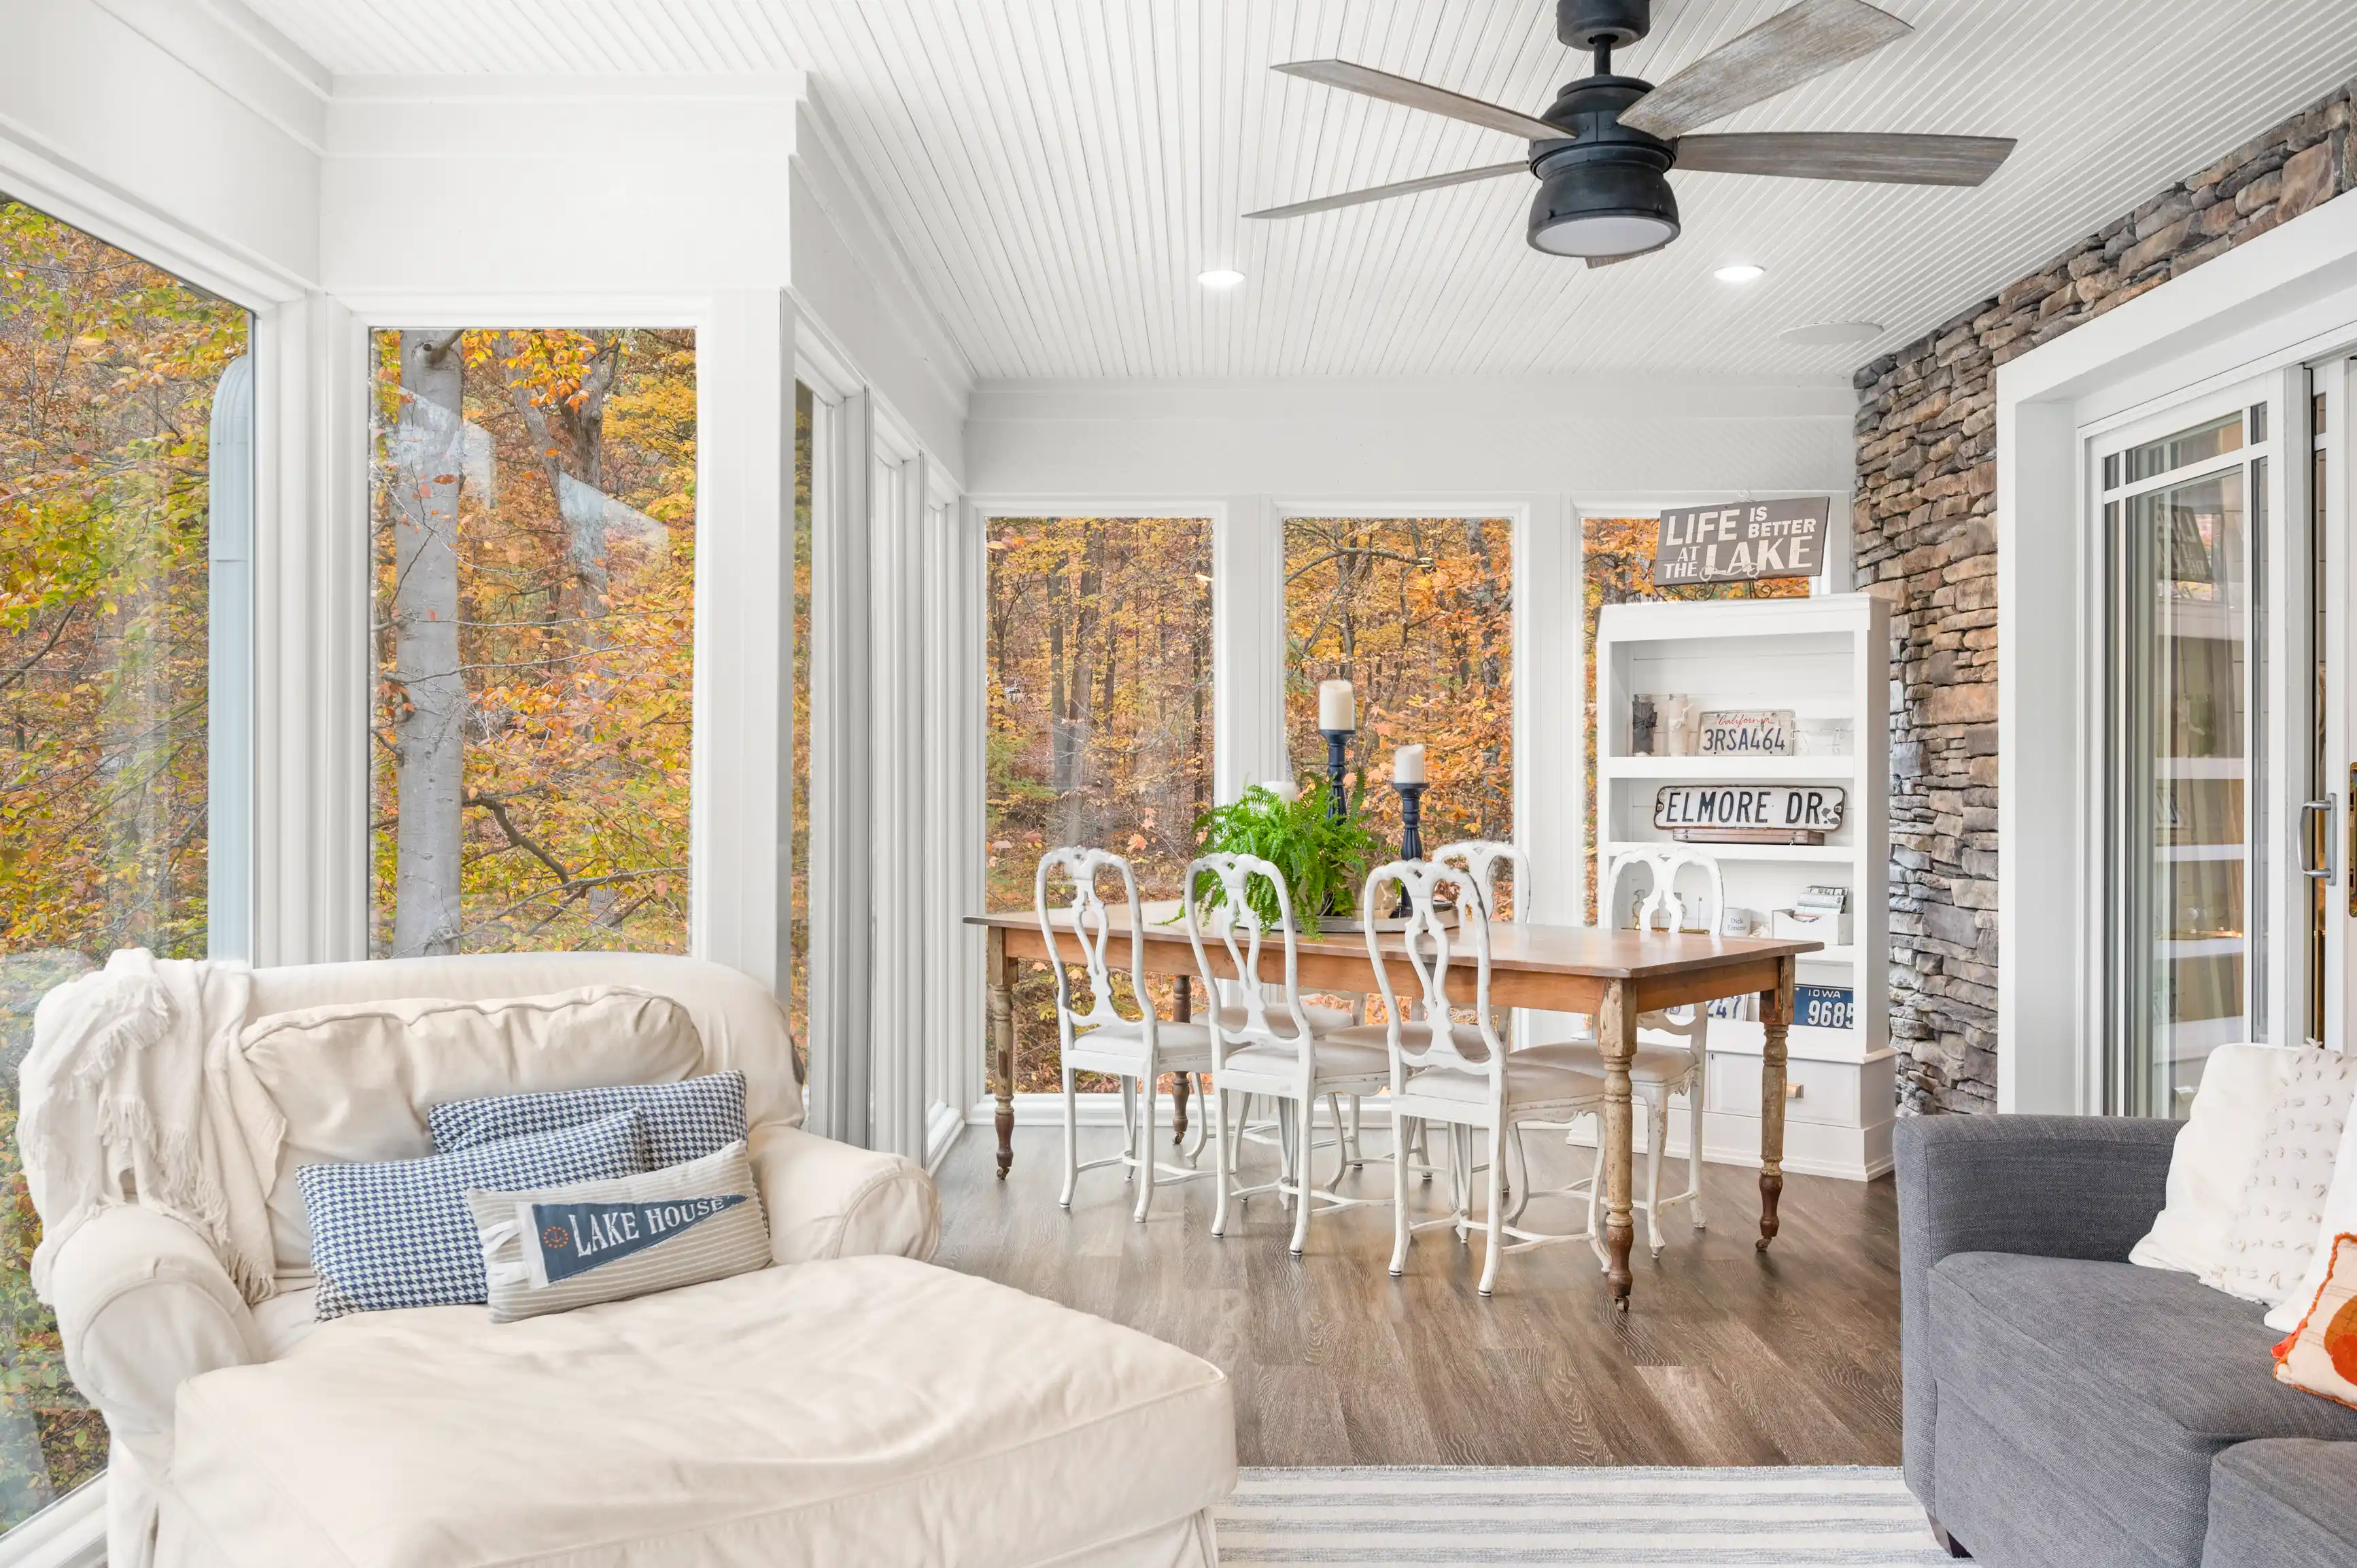 Cozy lakeside home interior with large windows showing autumn trees, a dining area with a wooden table and white chairs, and a living space with comfortable sofas, decorative cushions, and a ceiling fan.